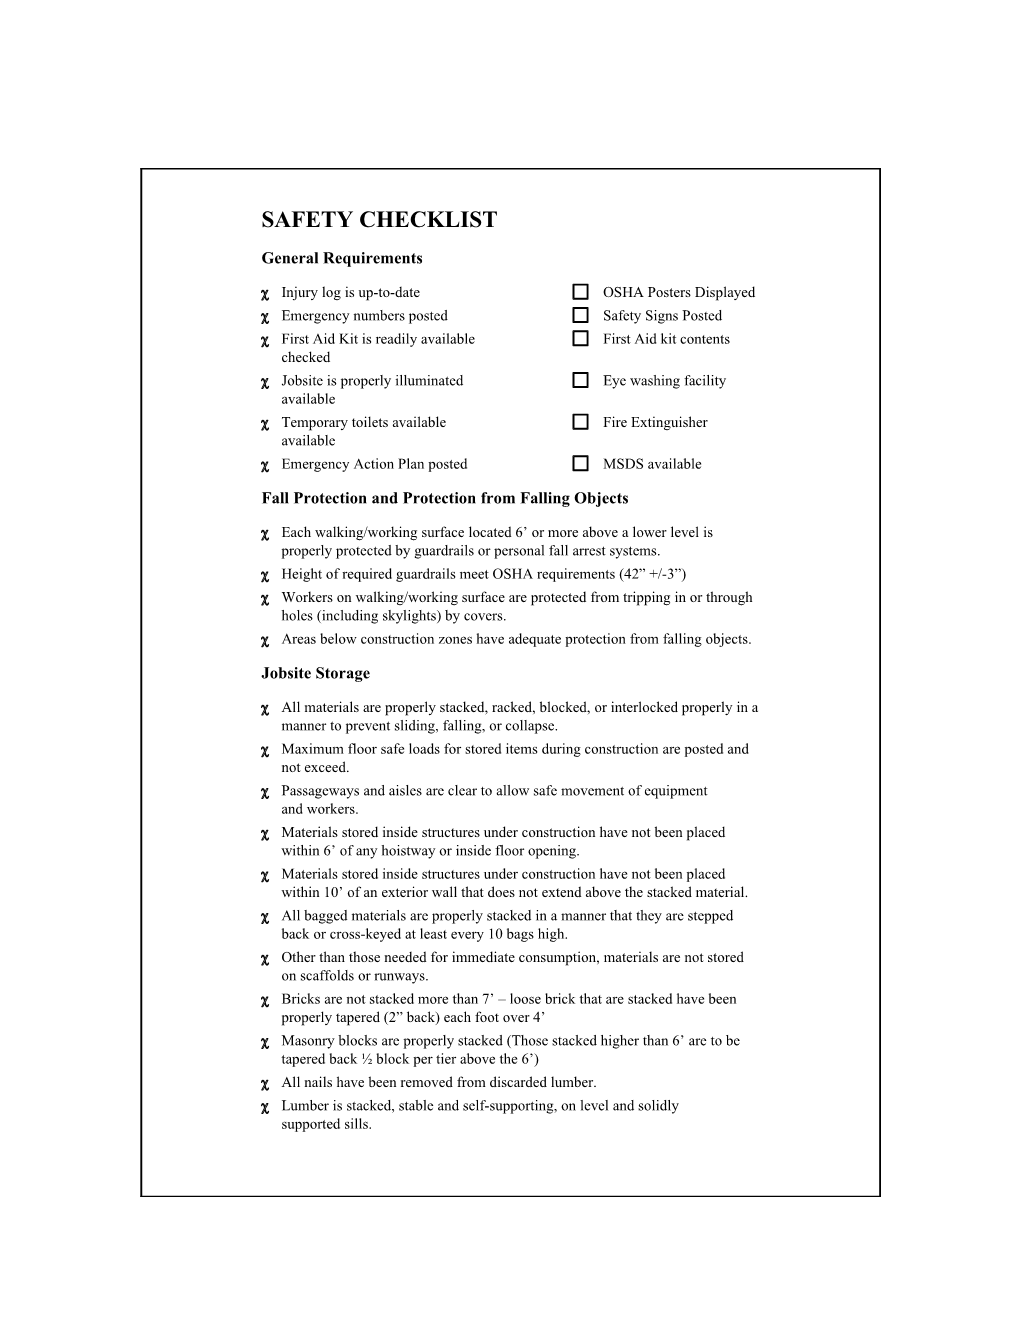 Safety Checklist General Requirements C Injury Log Is Up-To-Date C OSHA Posters Displayed